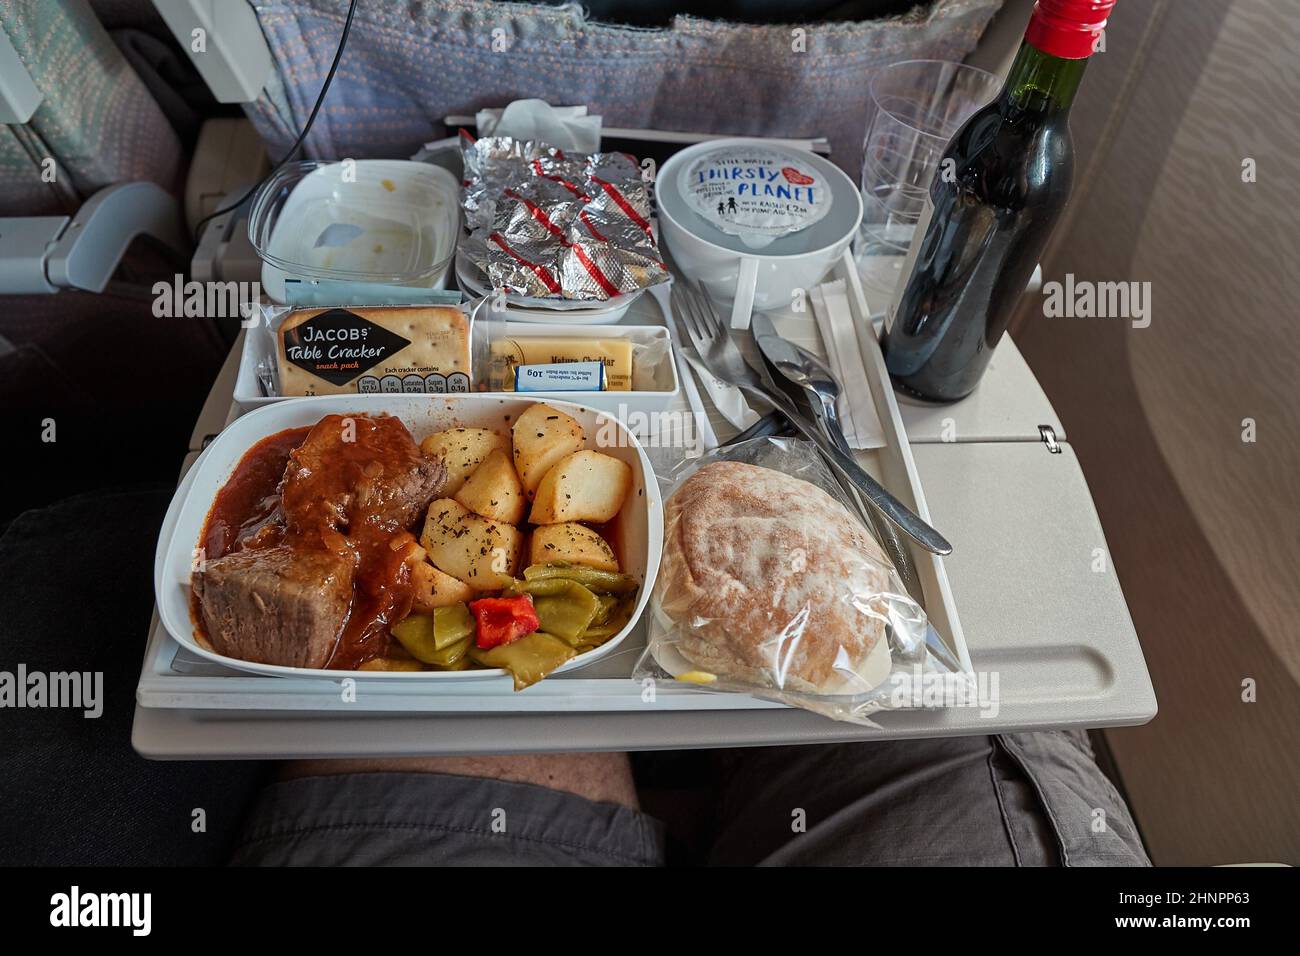 Airline food on the tray Stock Photo